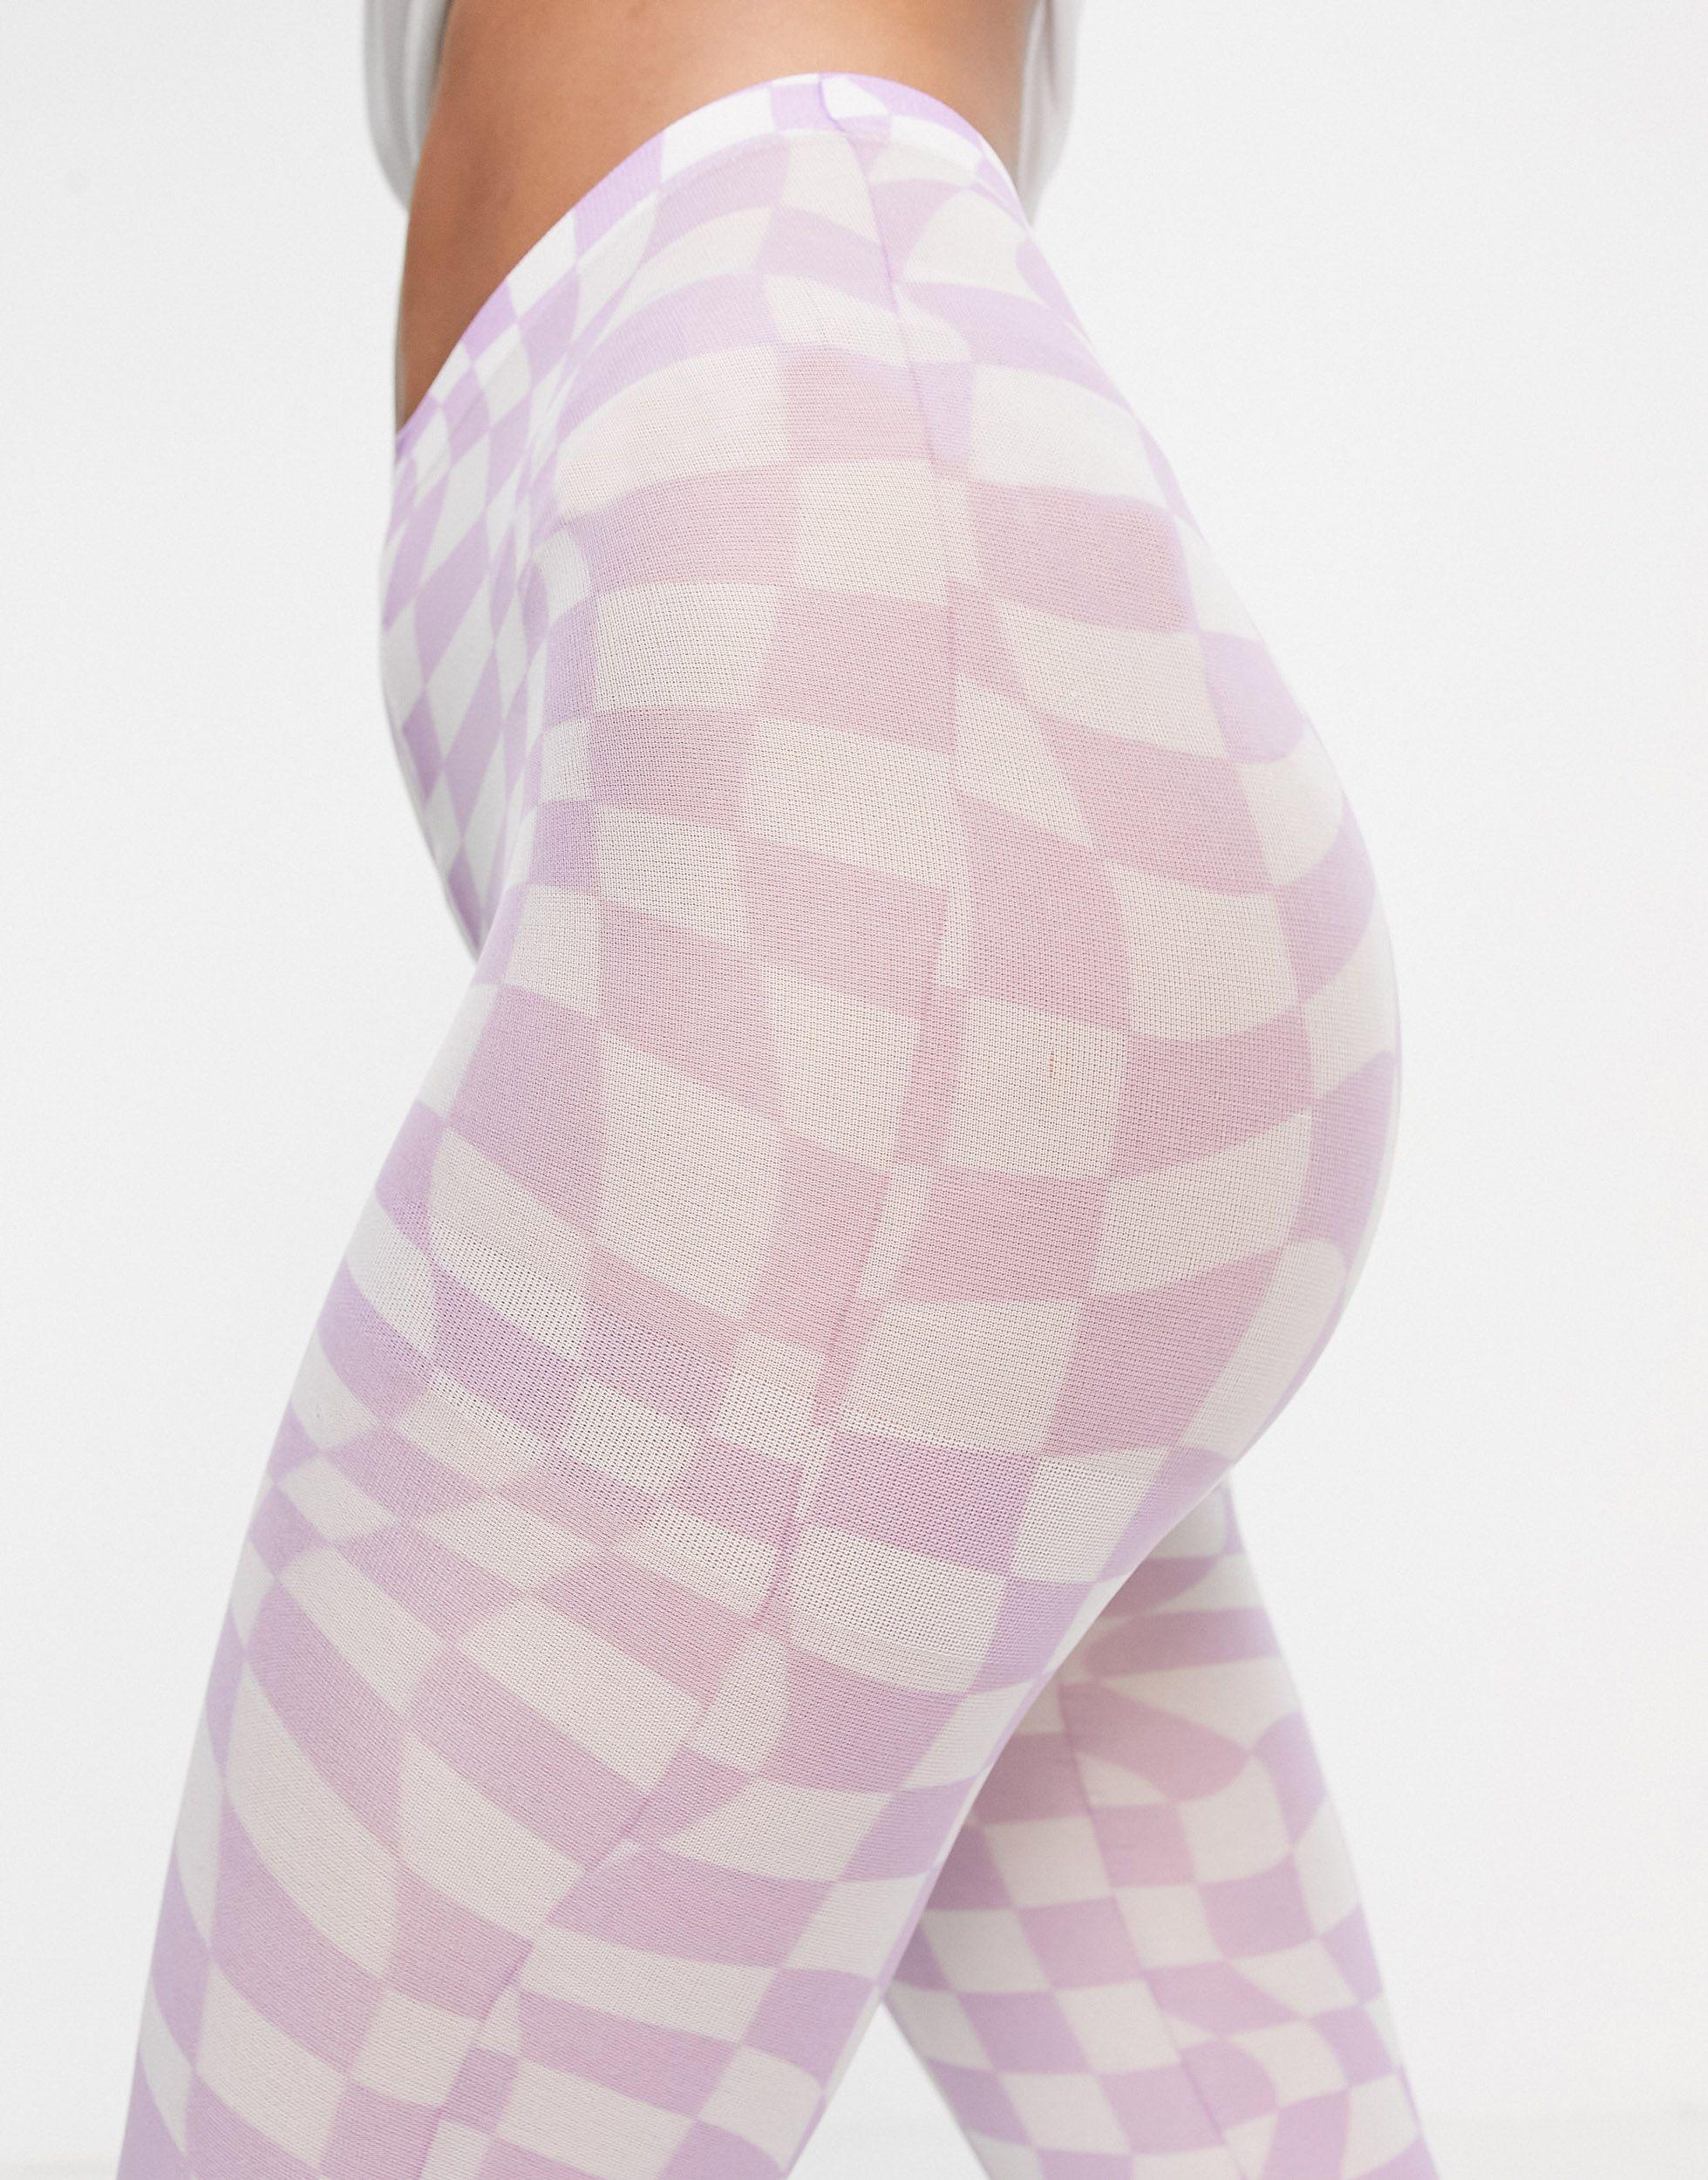 ASOS Checkerboard Printed Tights in Pink